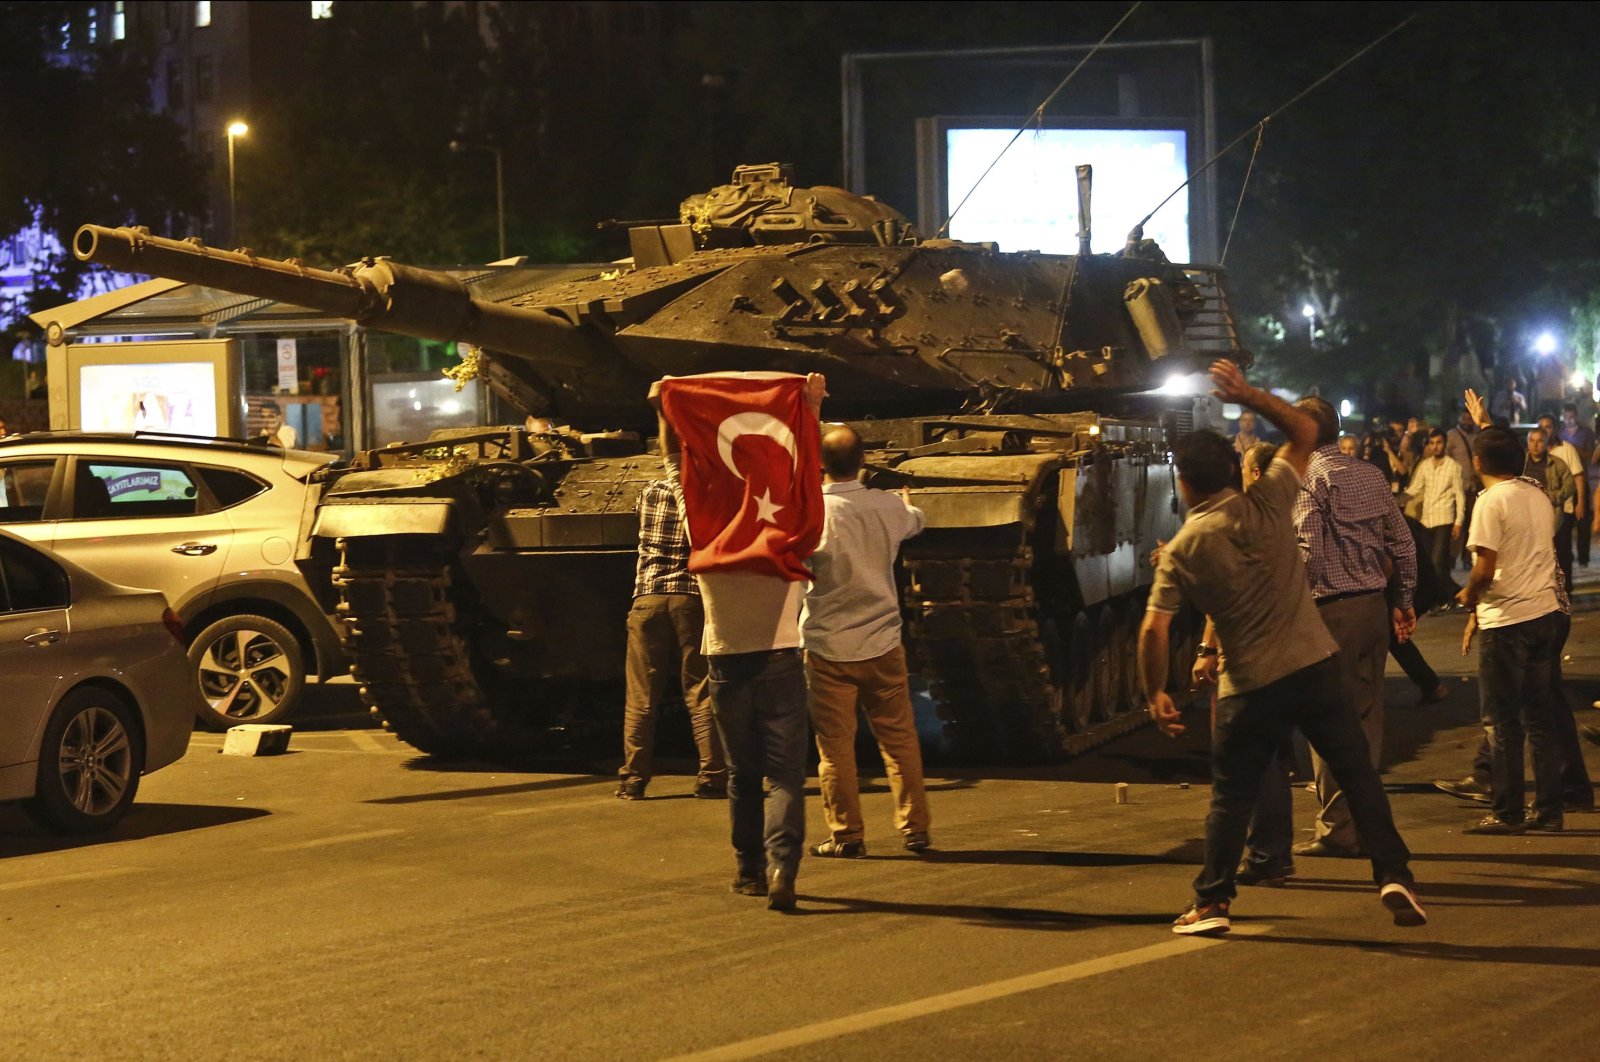 Tanks, part of the forces that attempted a coup, move into position as people attempt to stop them, in Ankara, Turkey, July 16, 2016. (AP Photo)